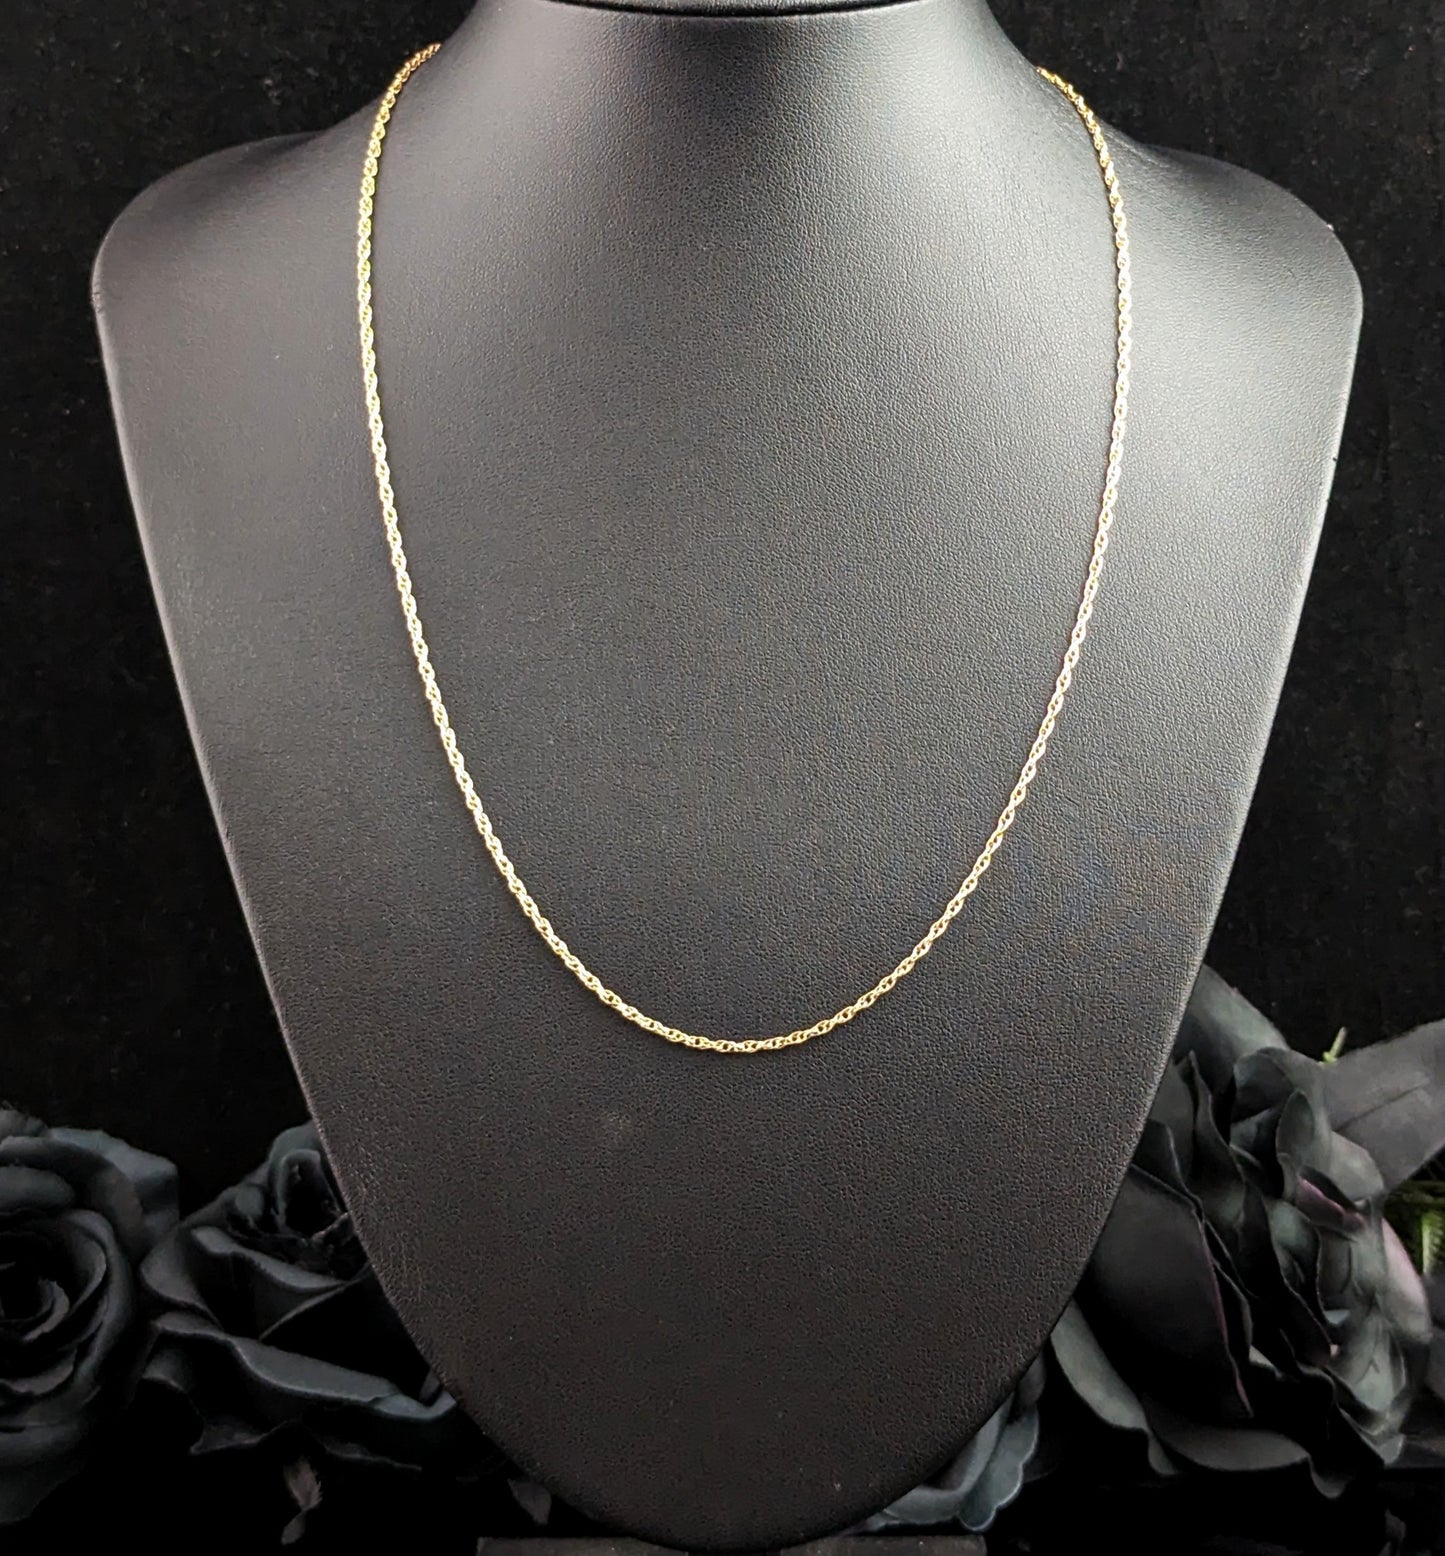 Vintage 9ct gold fancy link chain necklace, open rope chain